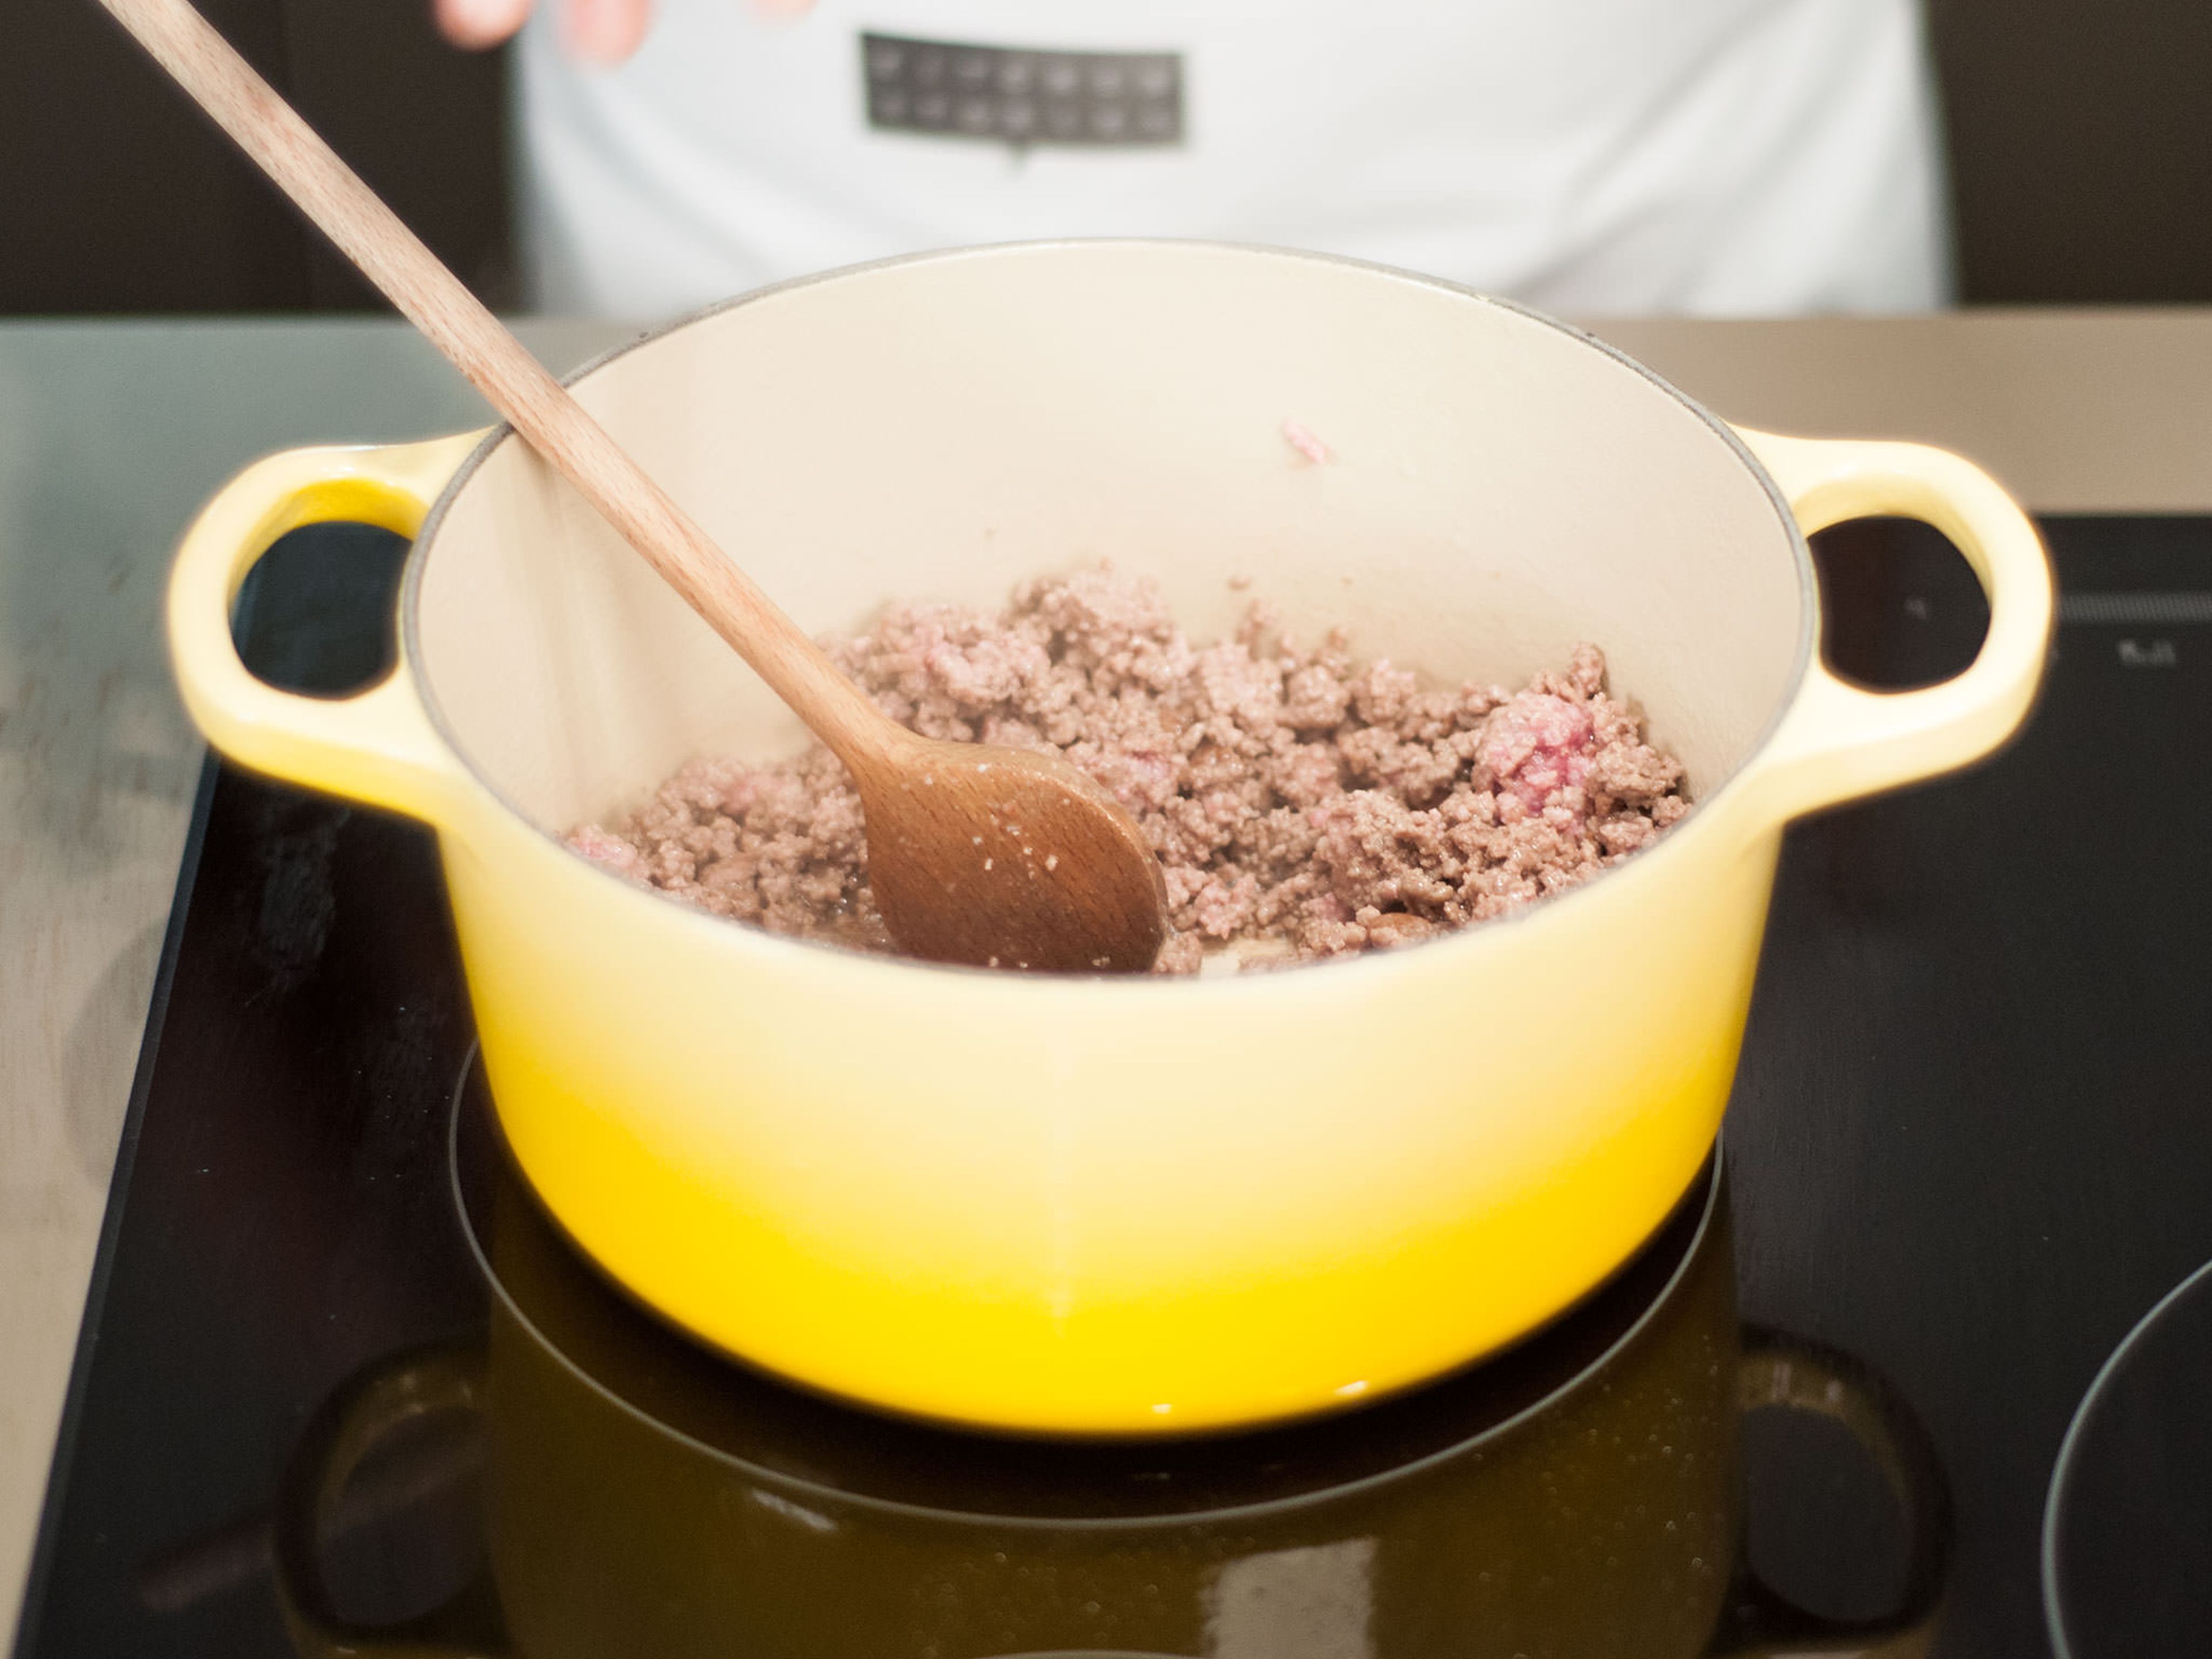 Heat up some vegetable oil in a large saucepan over medium heat. Add ground beef and sauté for approx. 2 – 3 min. before adding chili and onions. Avoid stirring too much so that the meat stays flavorful.